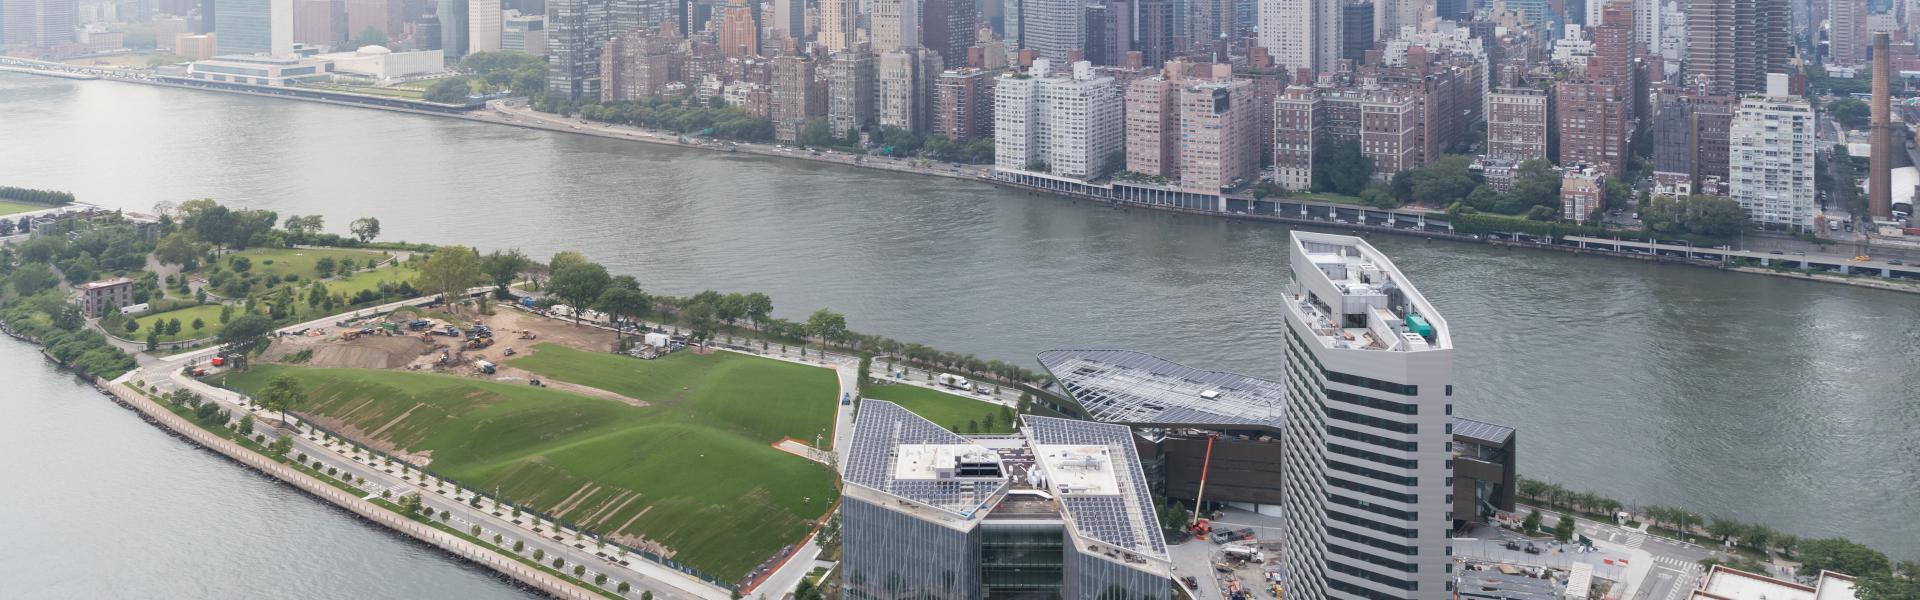 cornell tech, arial view